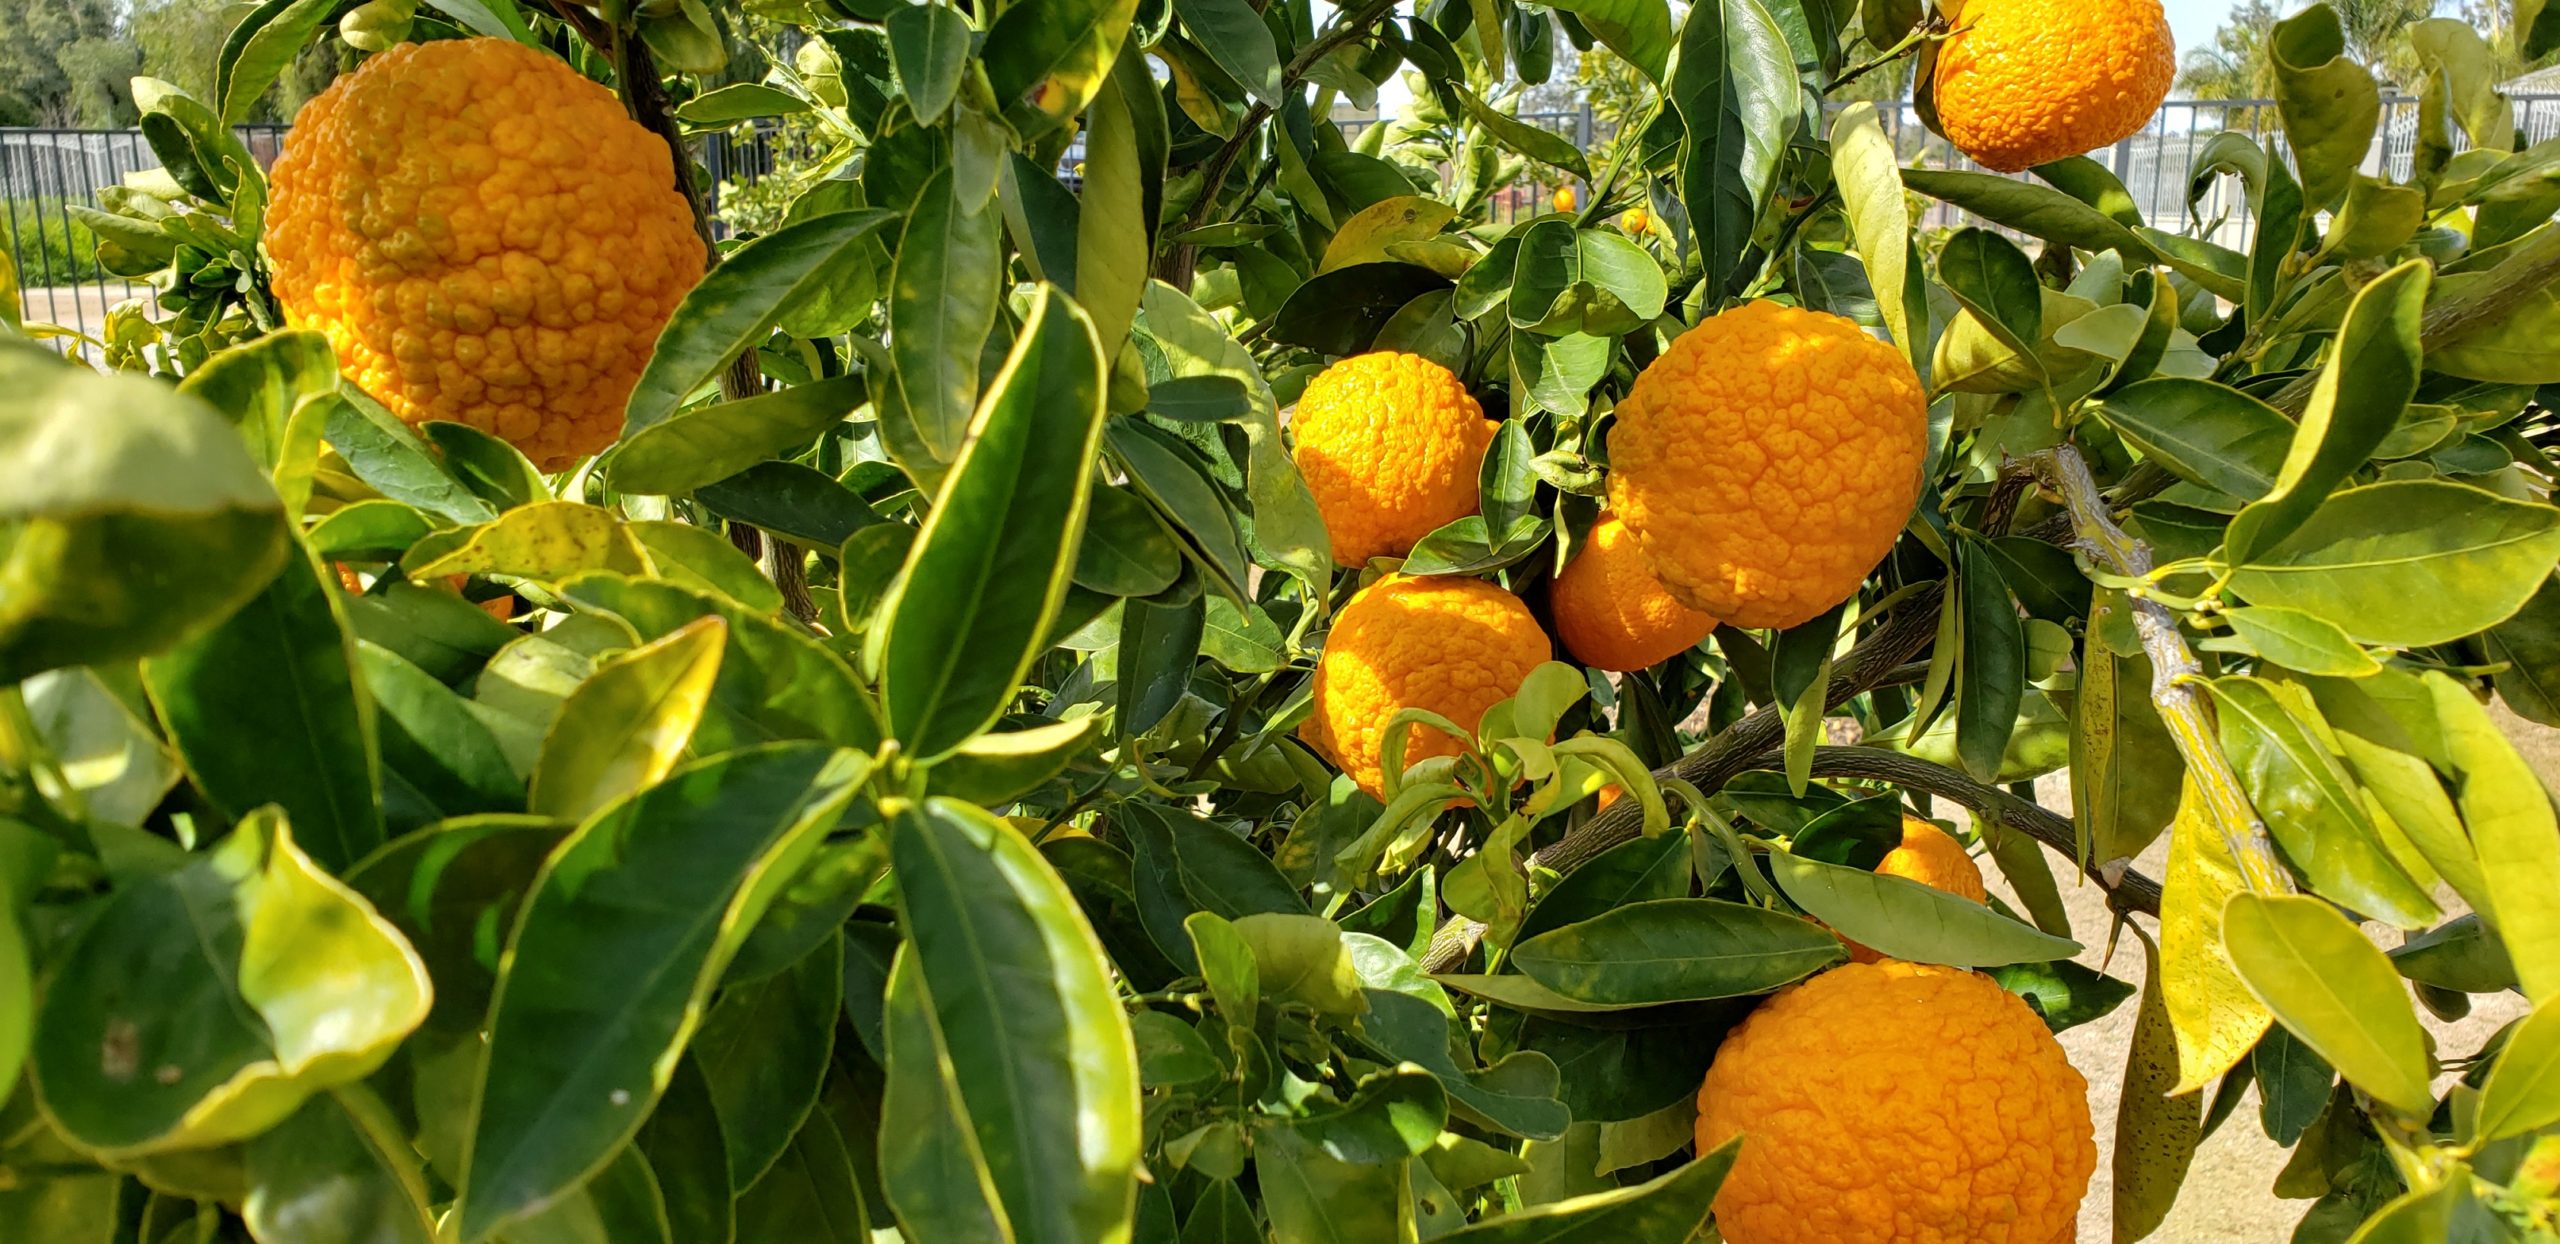 Great Garden Products - Gold Nugget Mandarins 20190212_114147